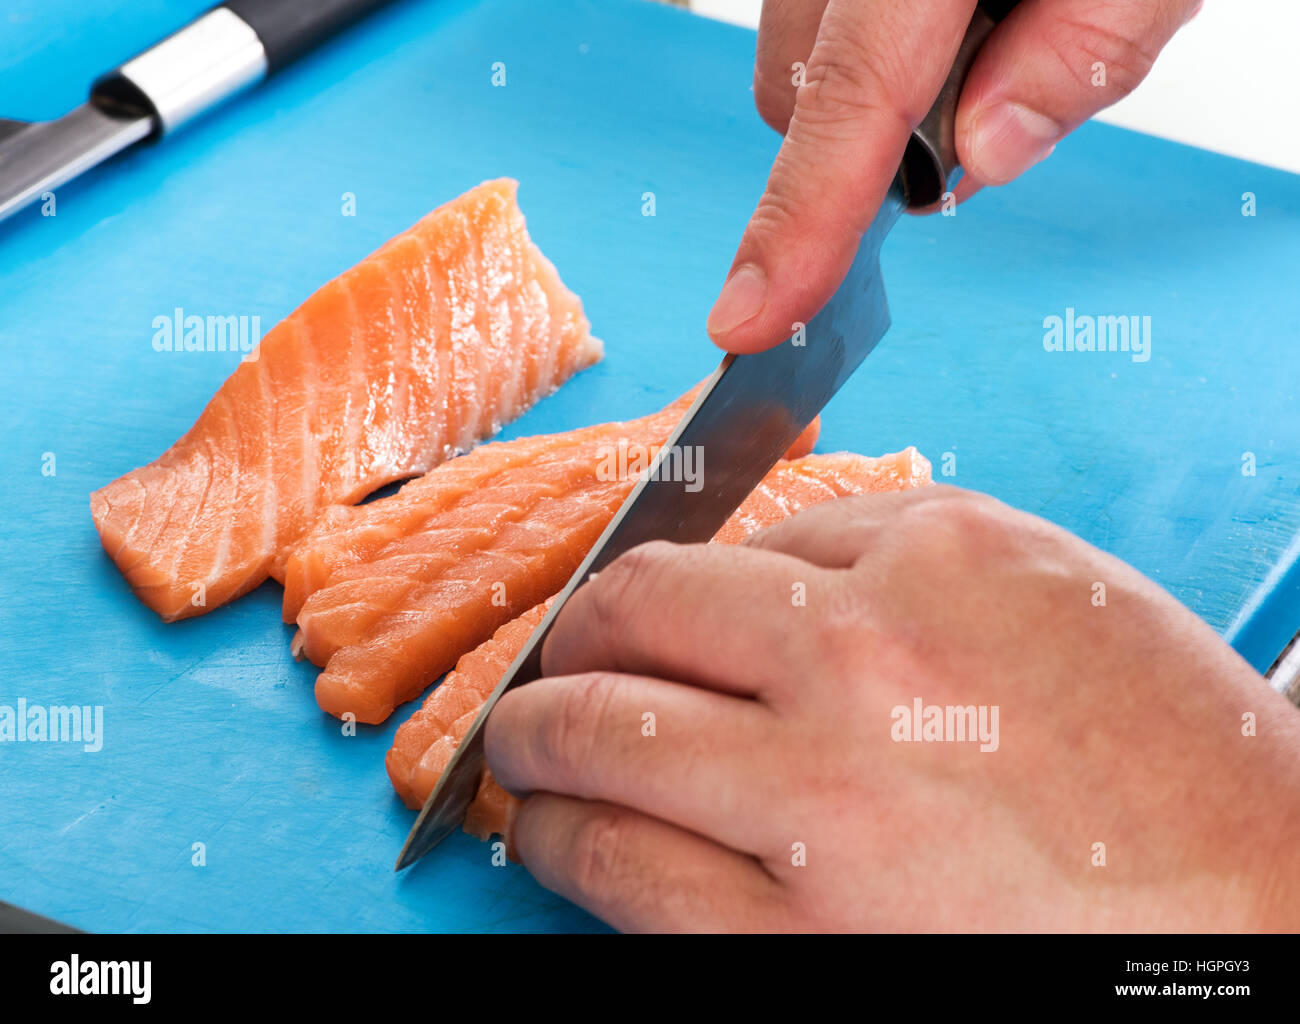 Chef slicing raw fresh salmon fillet with a sharp knife in a Japanese sushi bar , close up view on his hands and the fish on a blue cutting board Stock Photo